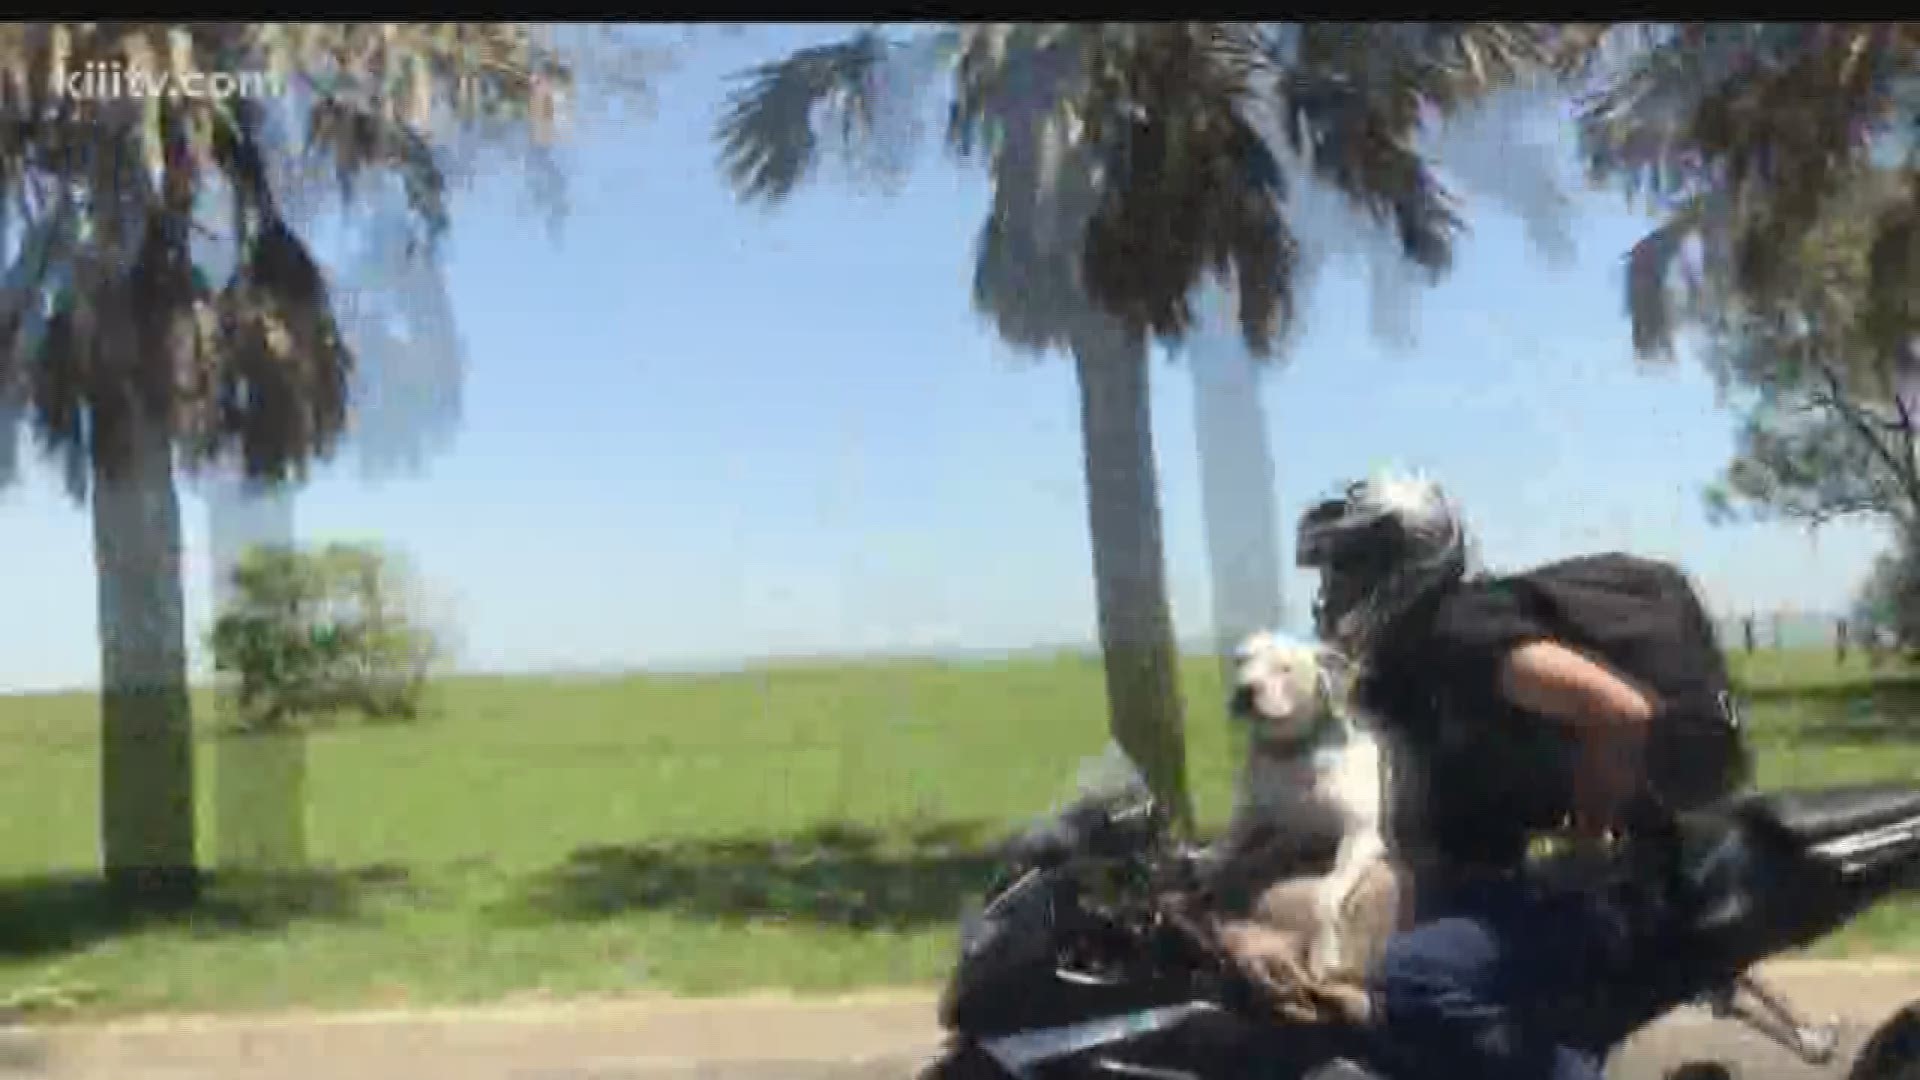 The video was captured by a passerby along Ocean Drive who saw the pet sitting in front of the rider as they rolled by. The dog seemed to enjoy the experience.